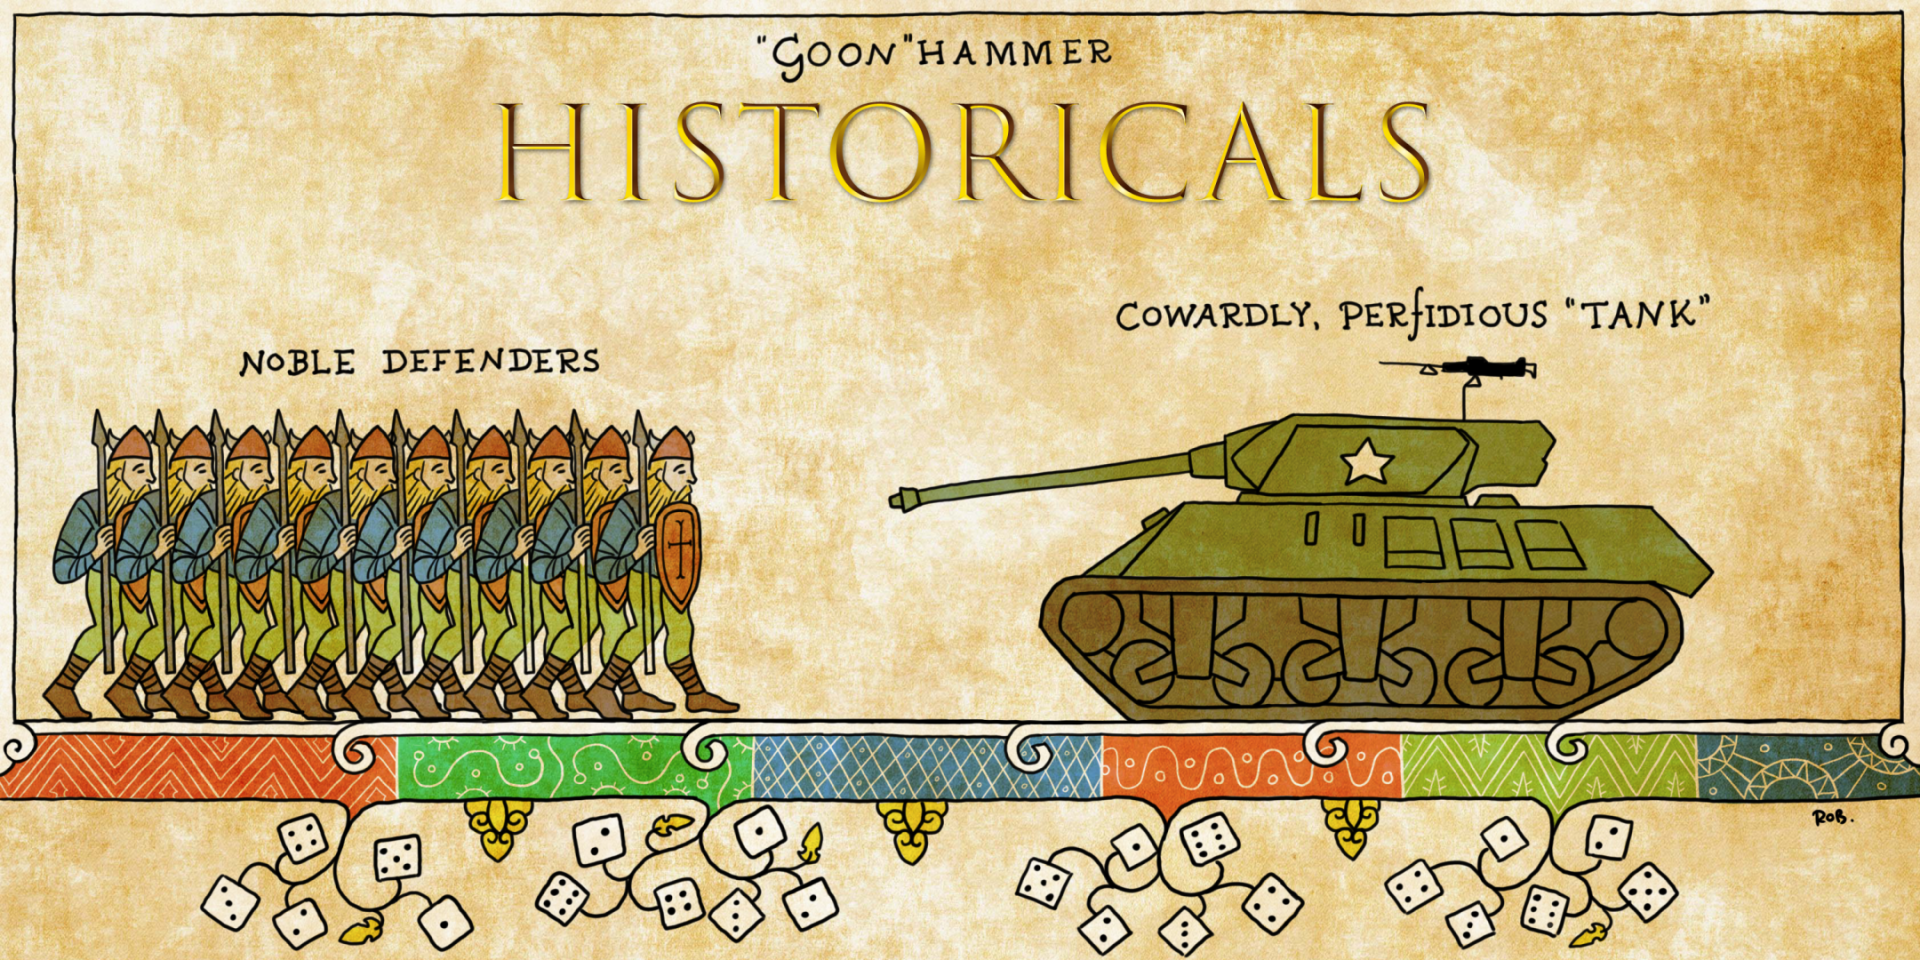 Goonhammer Historicals – World of Tanks (The Tabletop Game!) Review